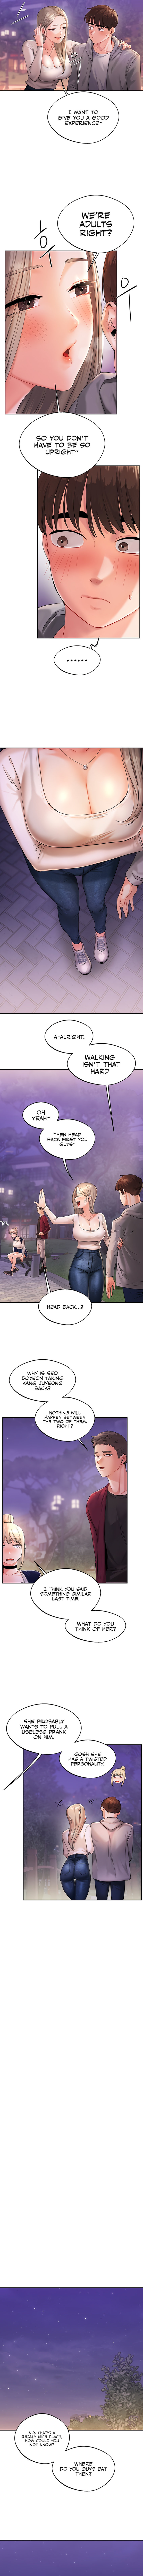 Relationship Reversal Chapter 2 - Page 8